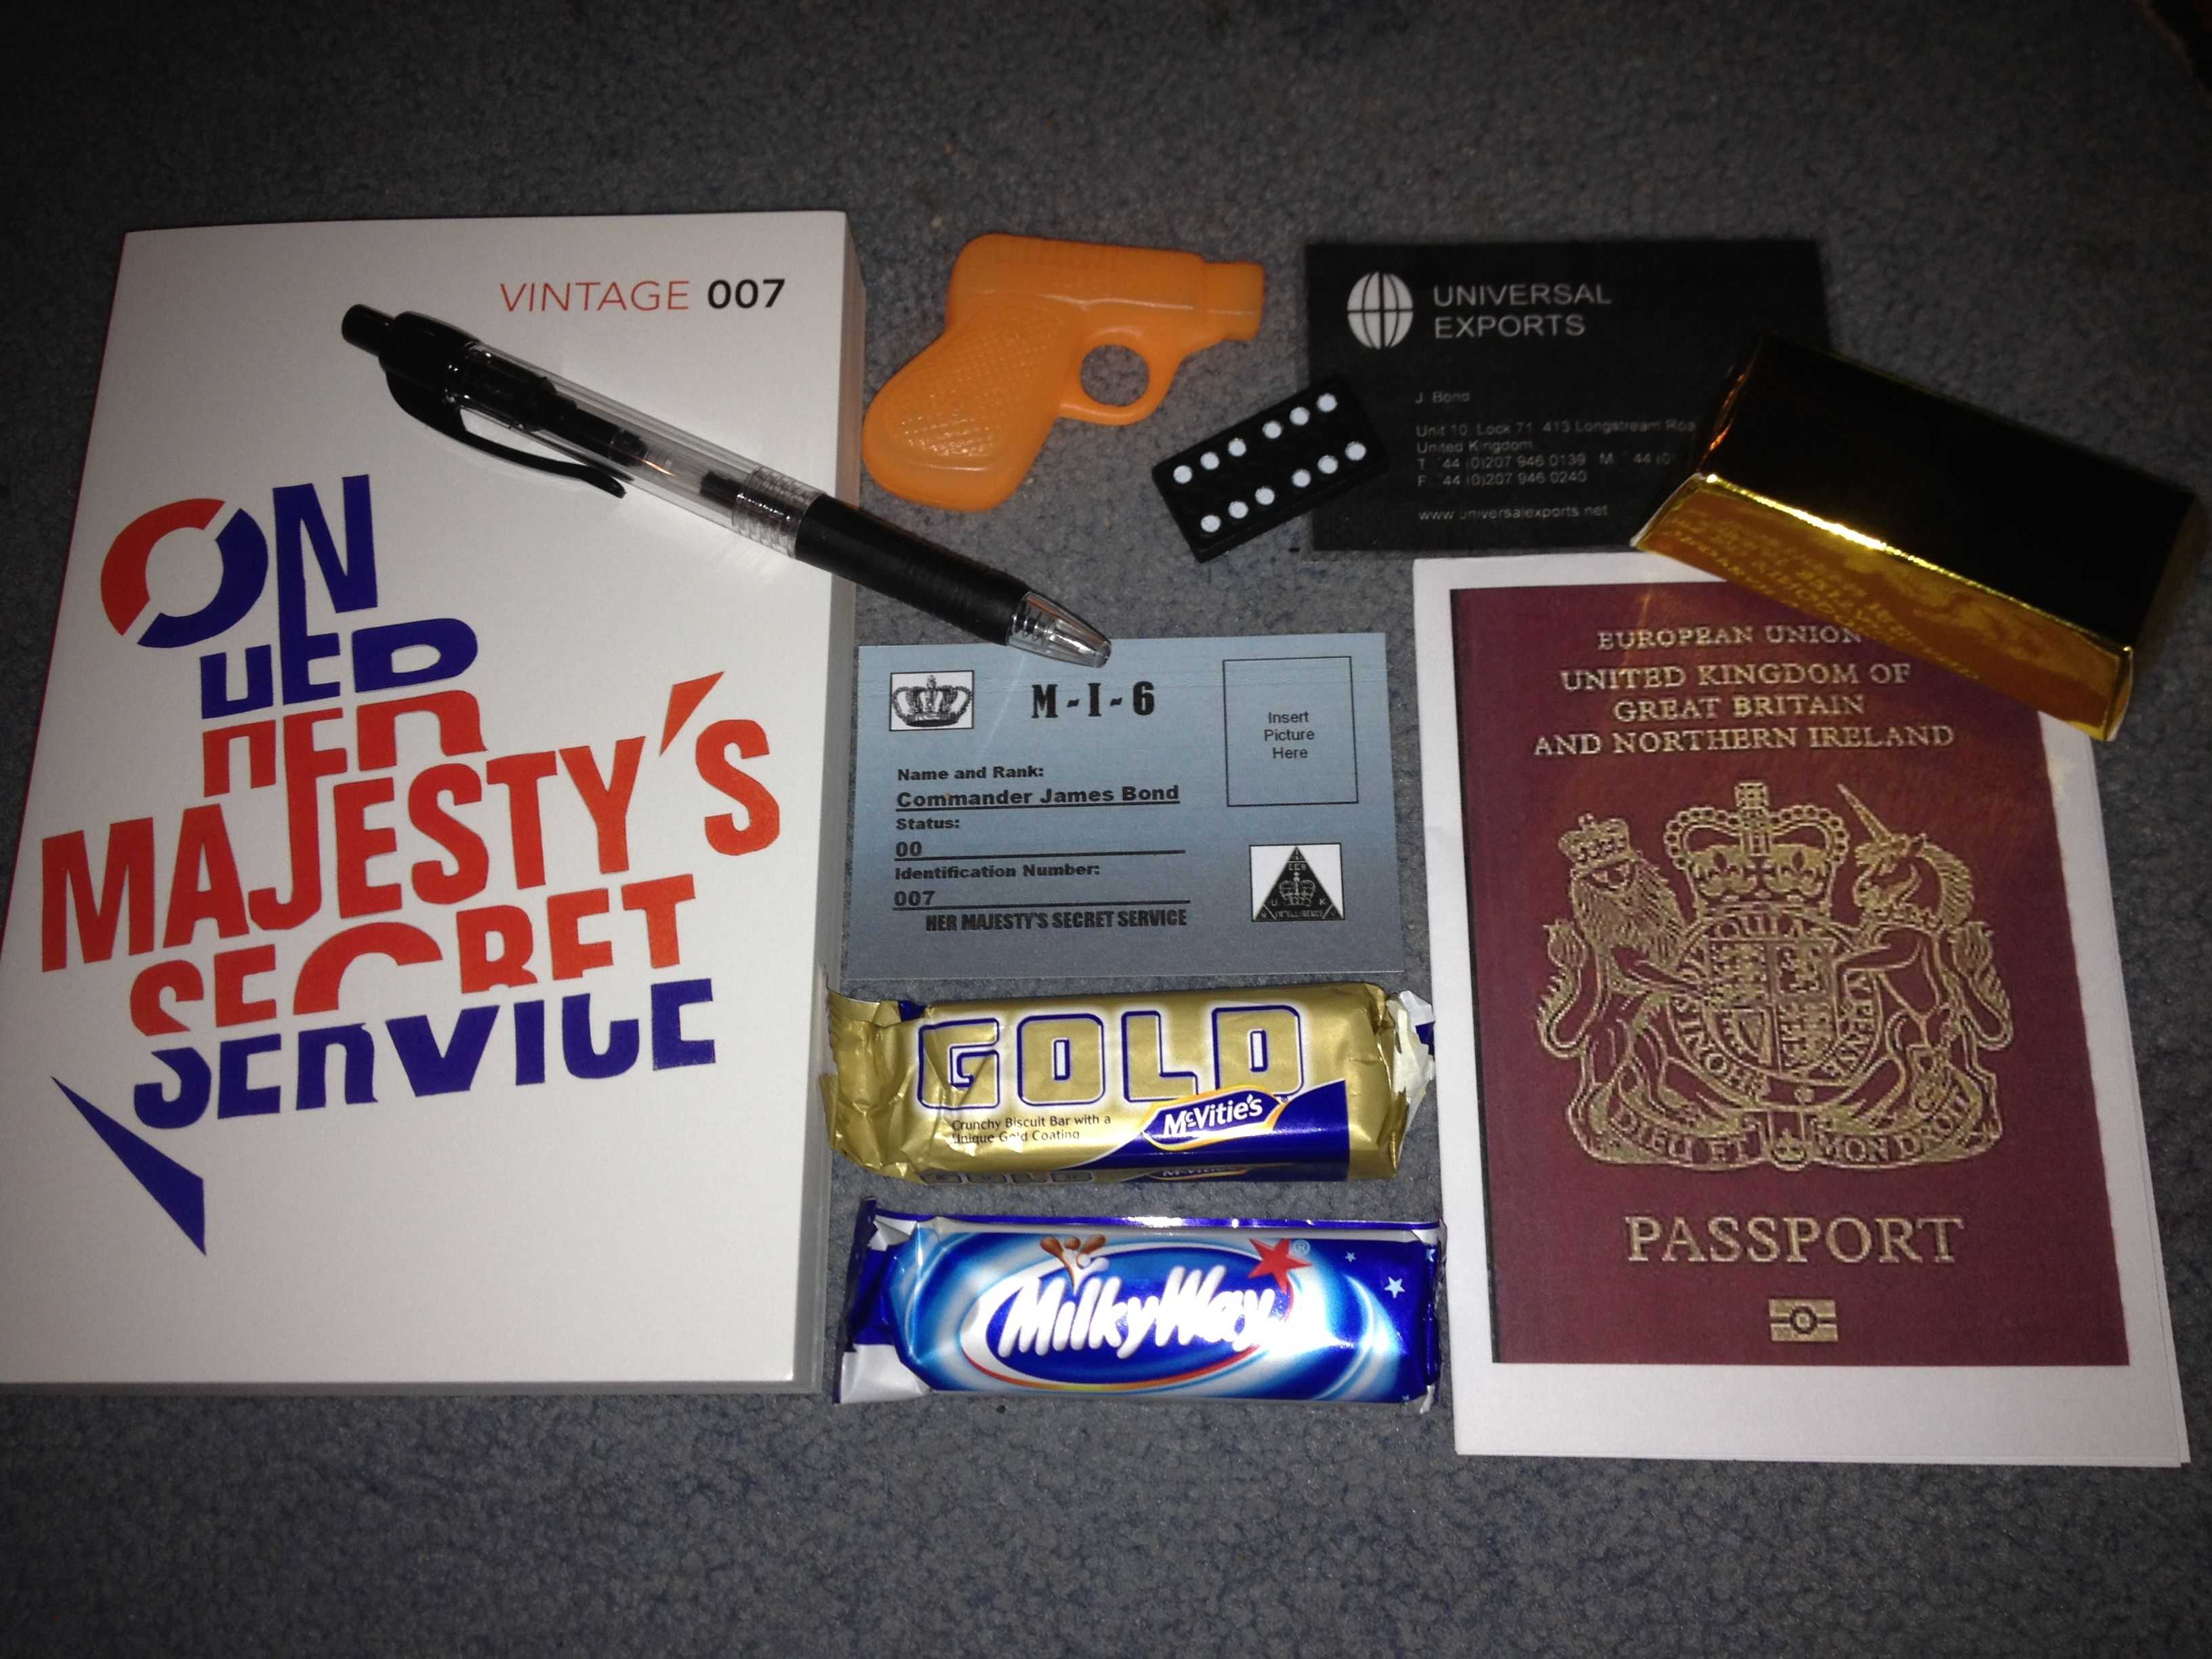 Party Bag Contents: Bond Book, Mcvities Gold Bar, Milky Way Intended For Mi6 Id Card Template